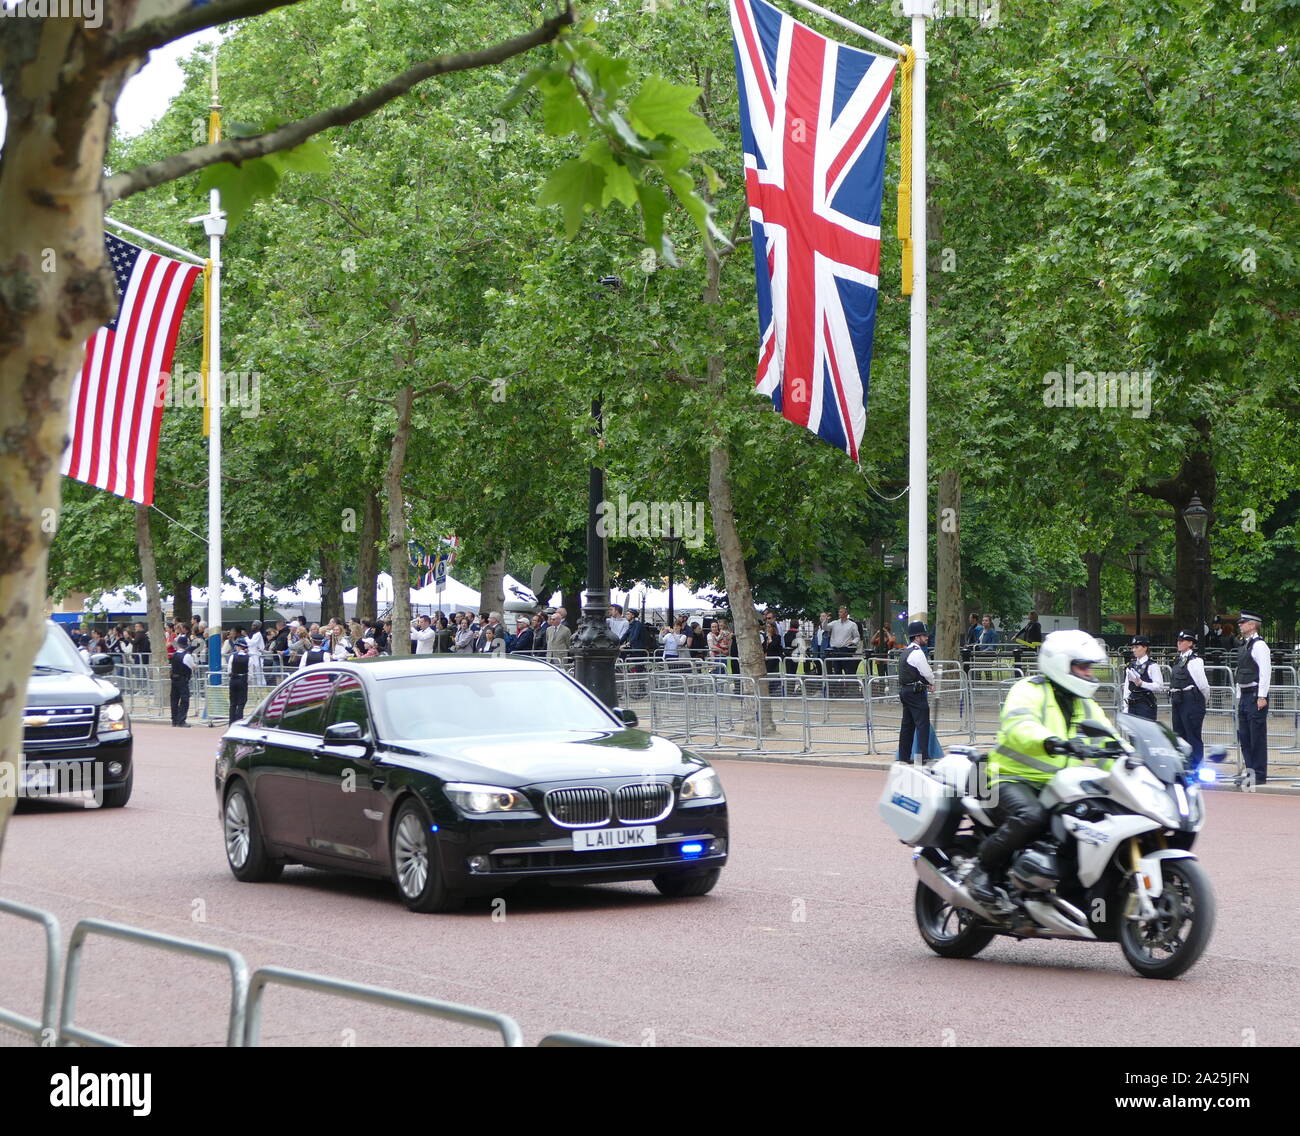 Princess Ann arrives at St James's Palace on the Mall en route to Buckingham Palace, London, secured by police during the state Visit for President Donald Trump June 2019 Stock Photo